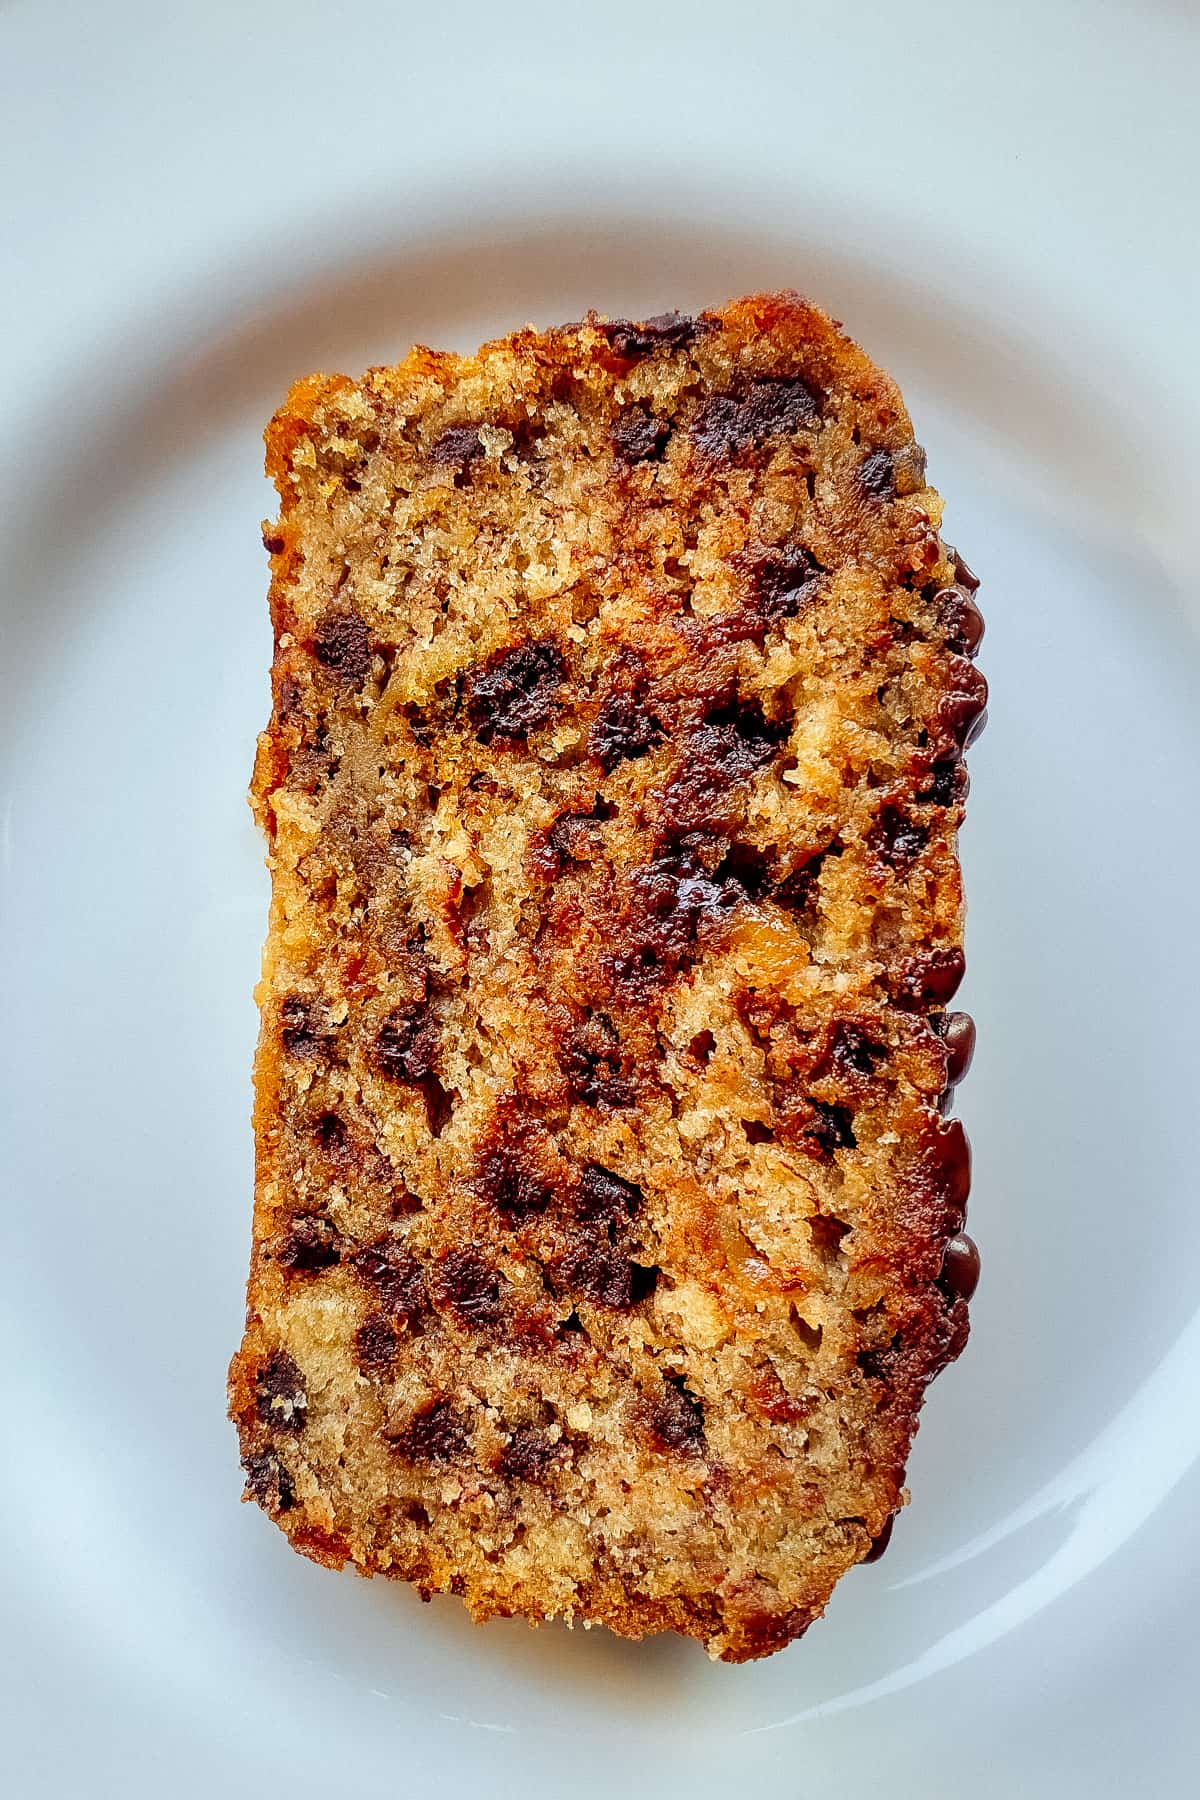 A slice of chocolate chip banana bread on a white plate